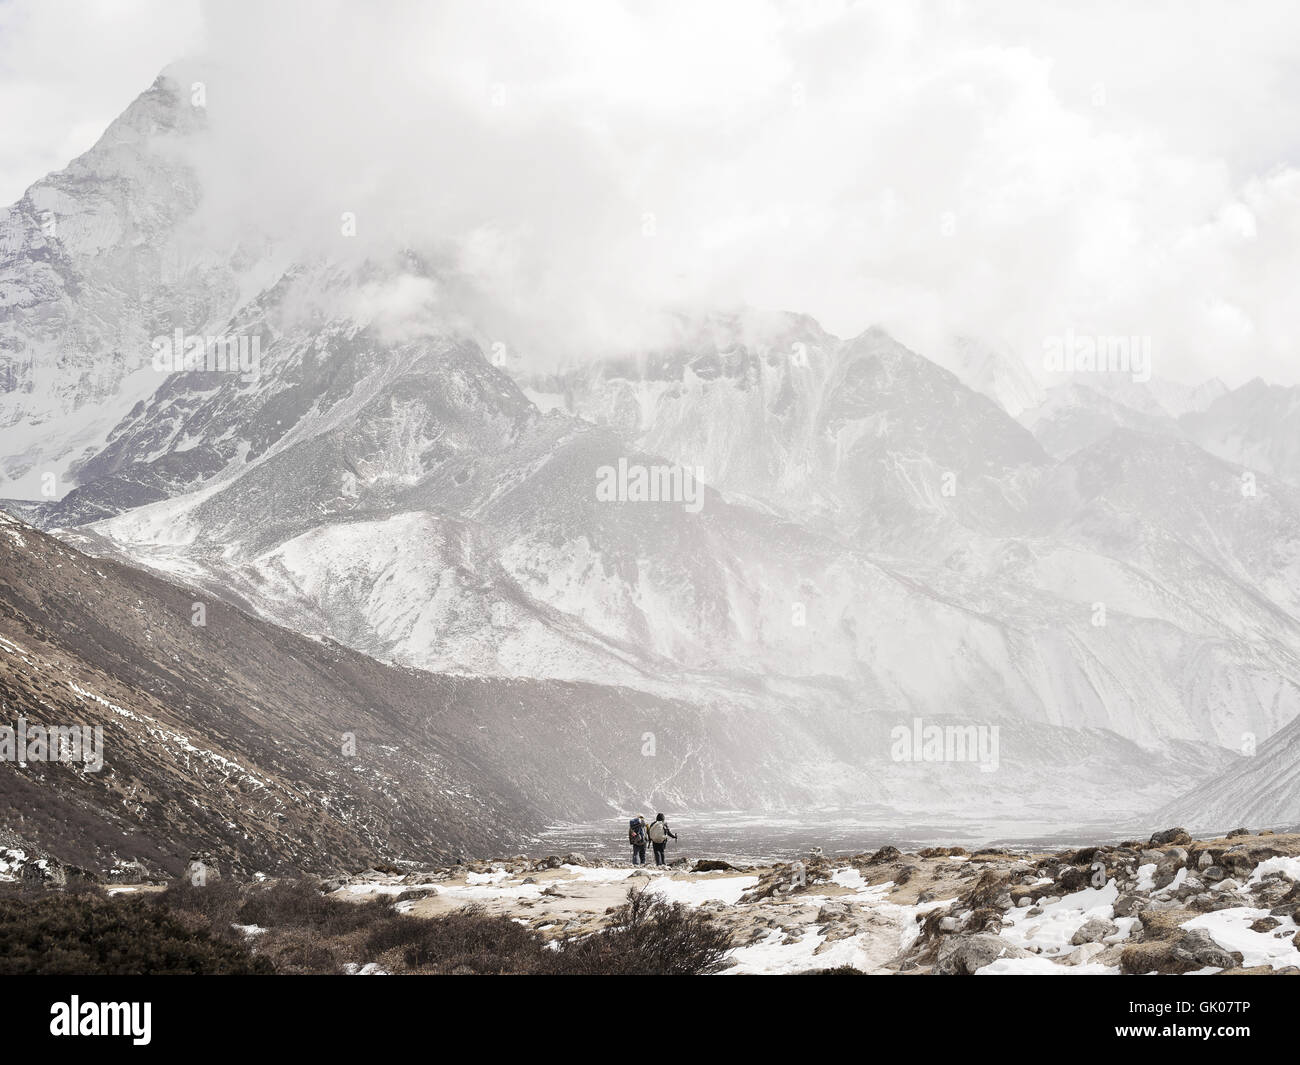 Hikers face the snowy Himalayas near Pheriche, Nepal on their journey of Everest Base Camp Stock Photo